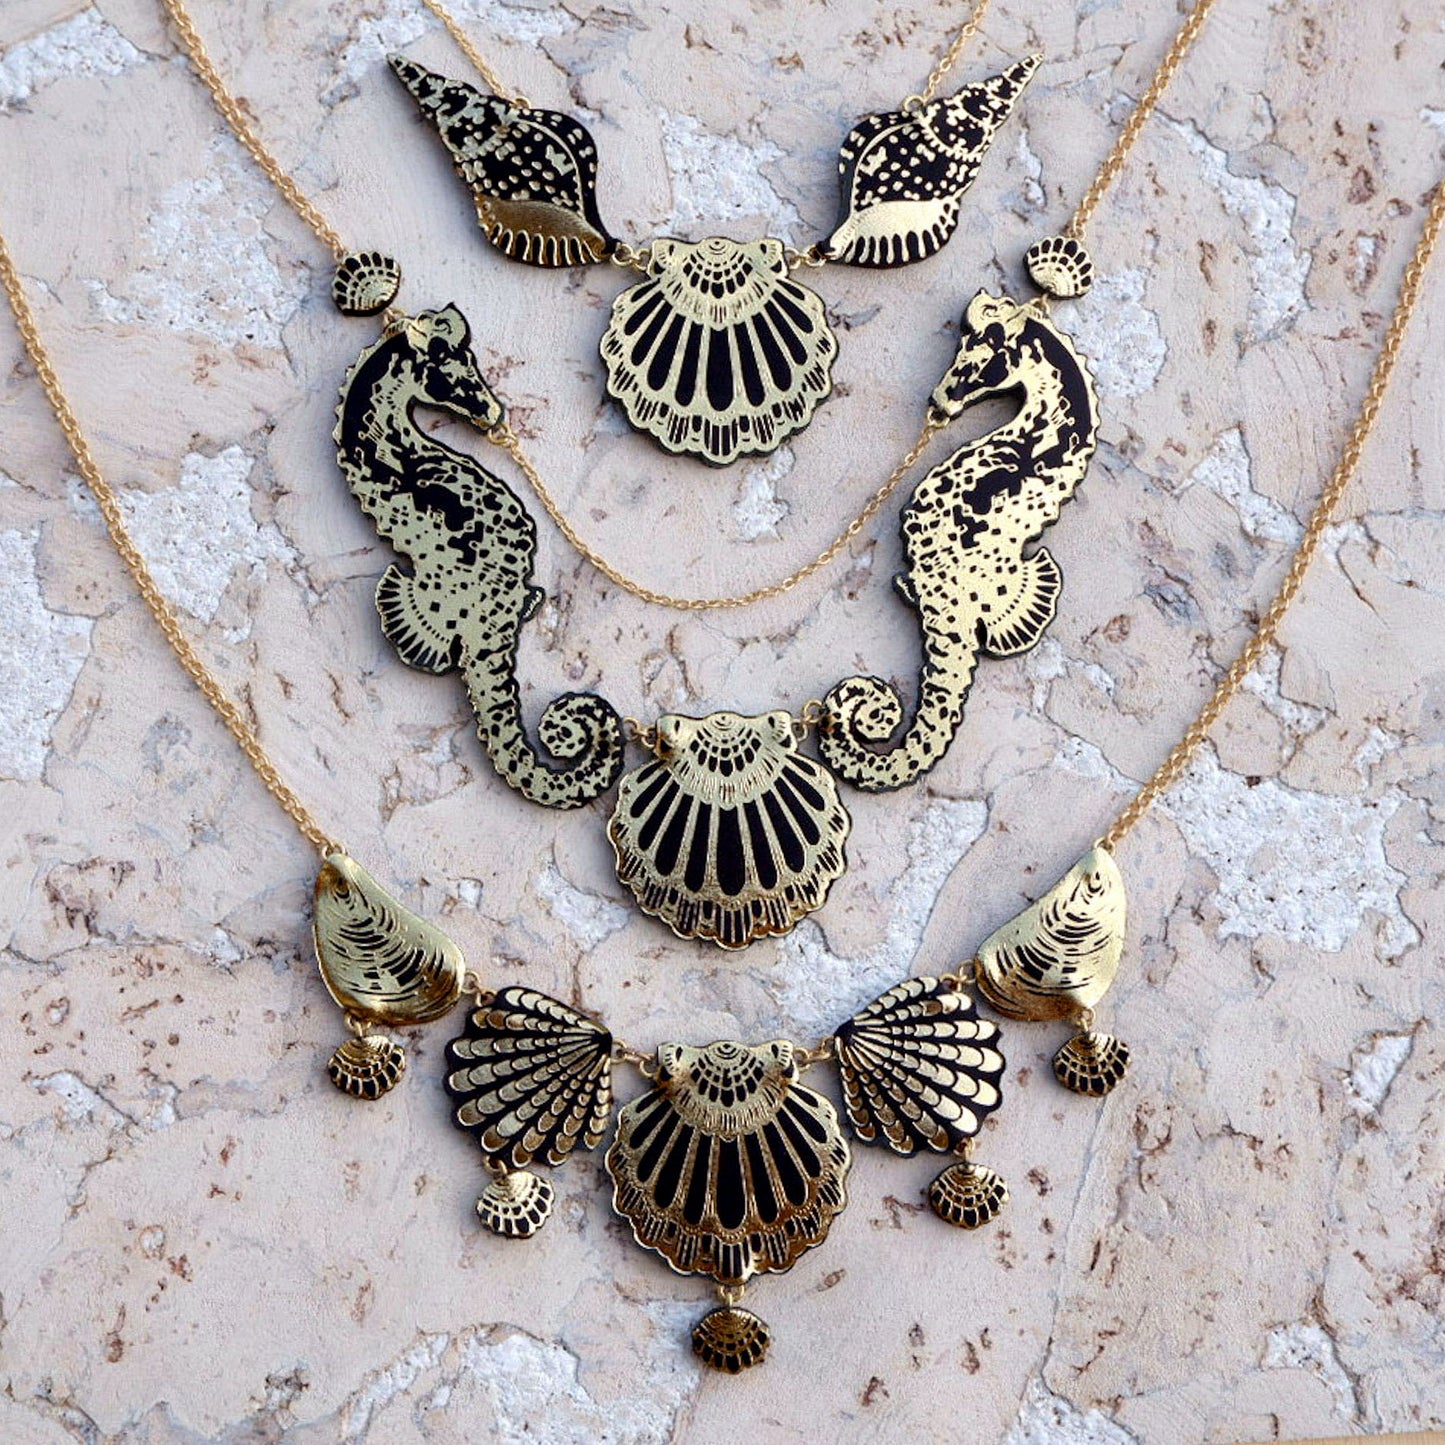 3 necklaces, made of black & gold printed leather sea shells & seahorses, on gold chain